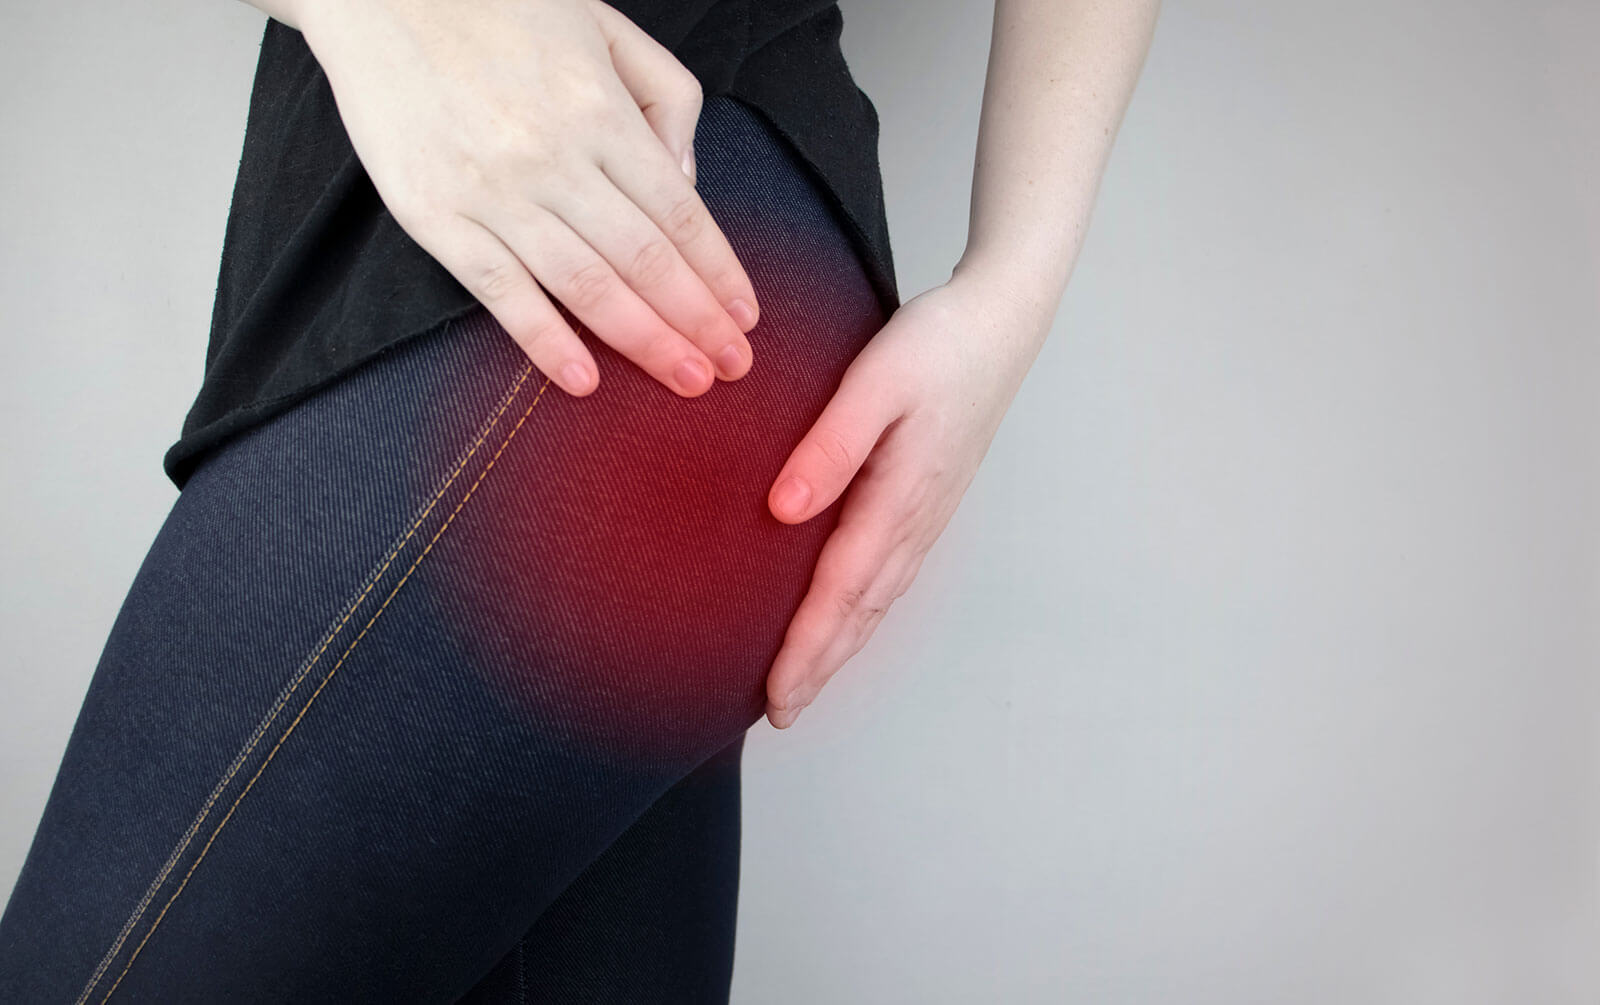 What You Need to Know About Piriformis Syndrome